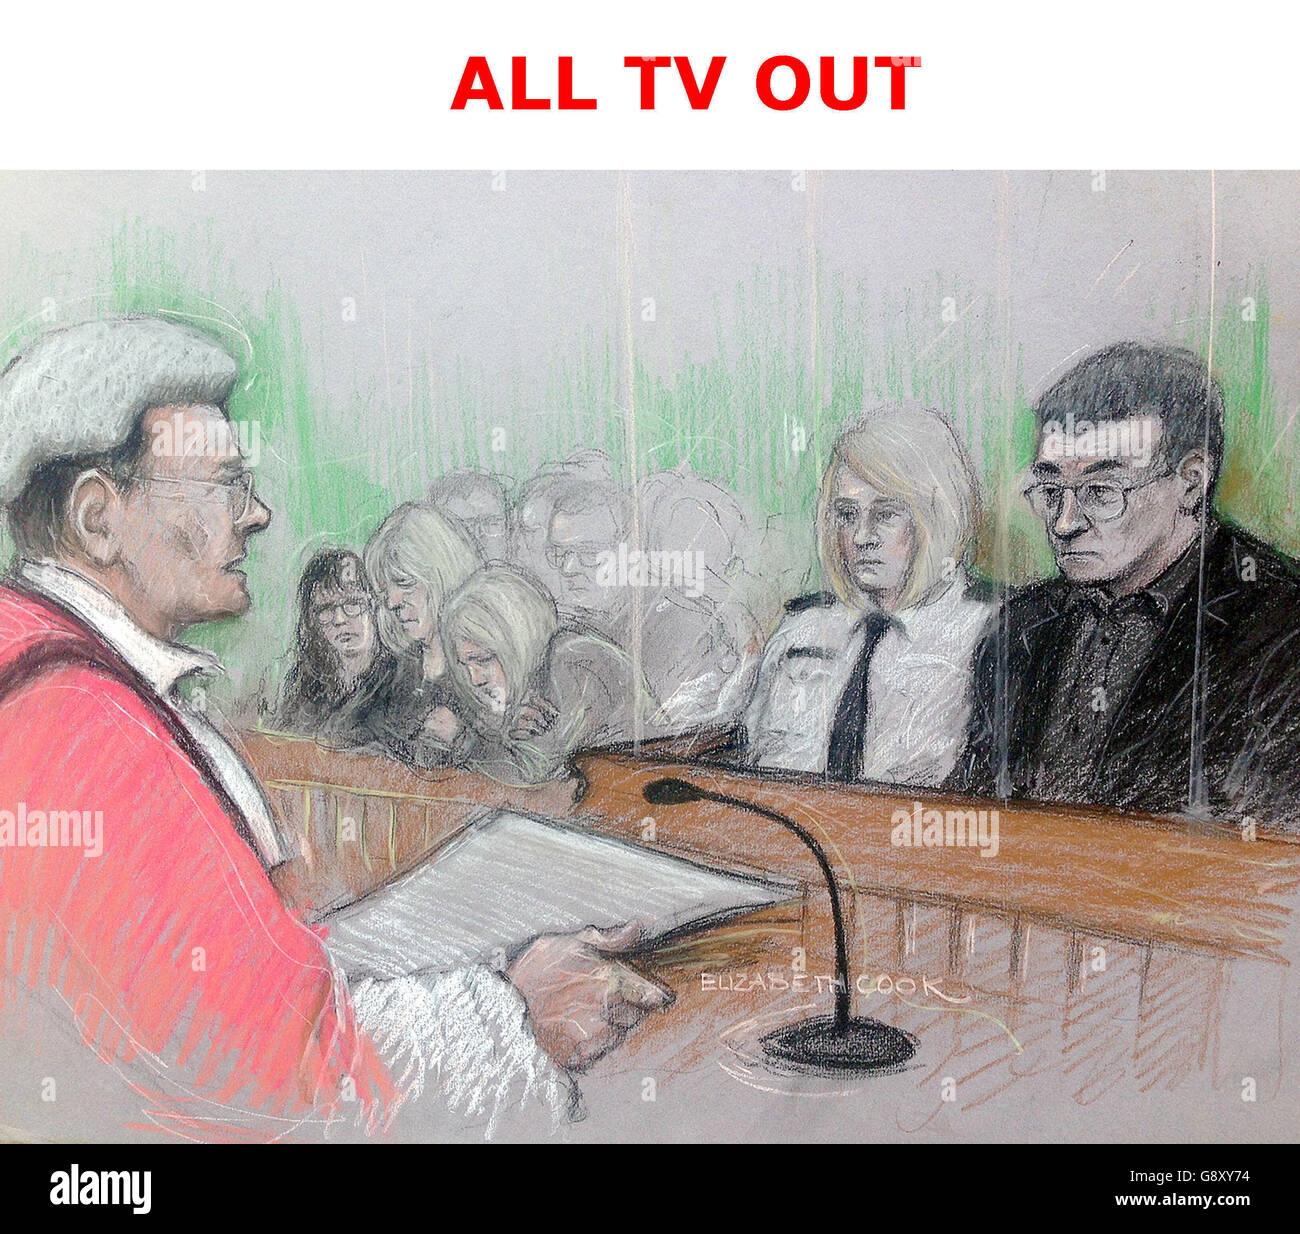 ALL TV OUT Court artist sketch by Elizabeth Cook of Christopher Hampton in the dock at Bristol Crown court, where he was jailed for at least 22 years for murdering teenager Melanie Road in a brutal sexually motivated attack 32 years ago. Stock Photo